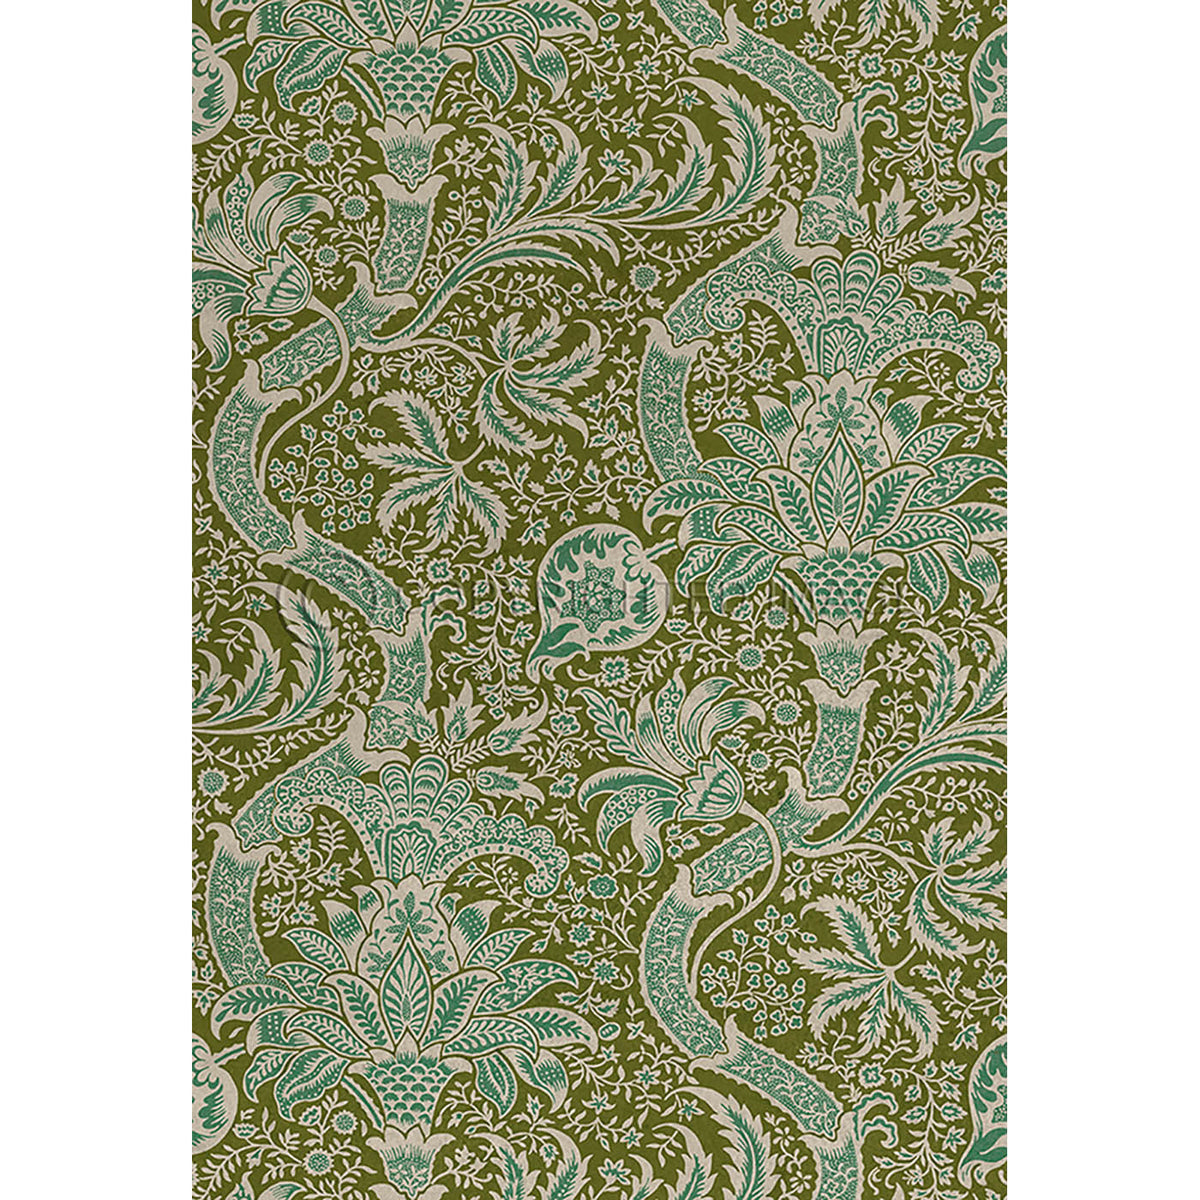 Indian Olive and Teal 38x56